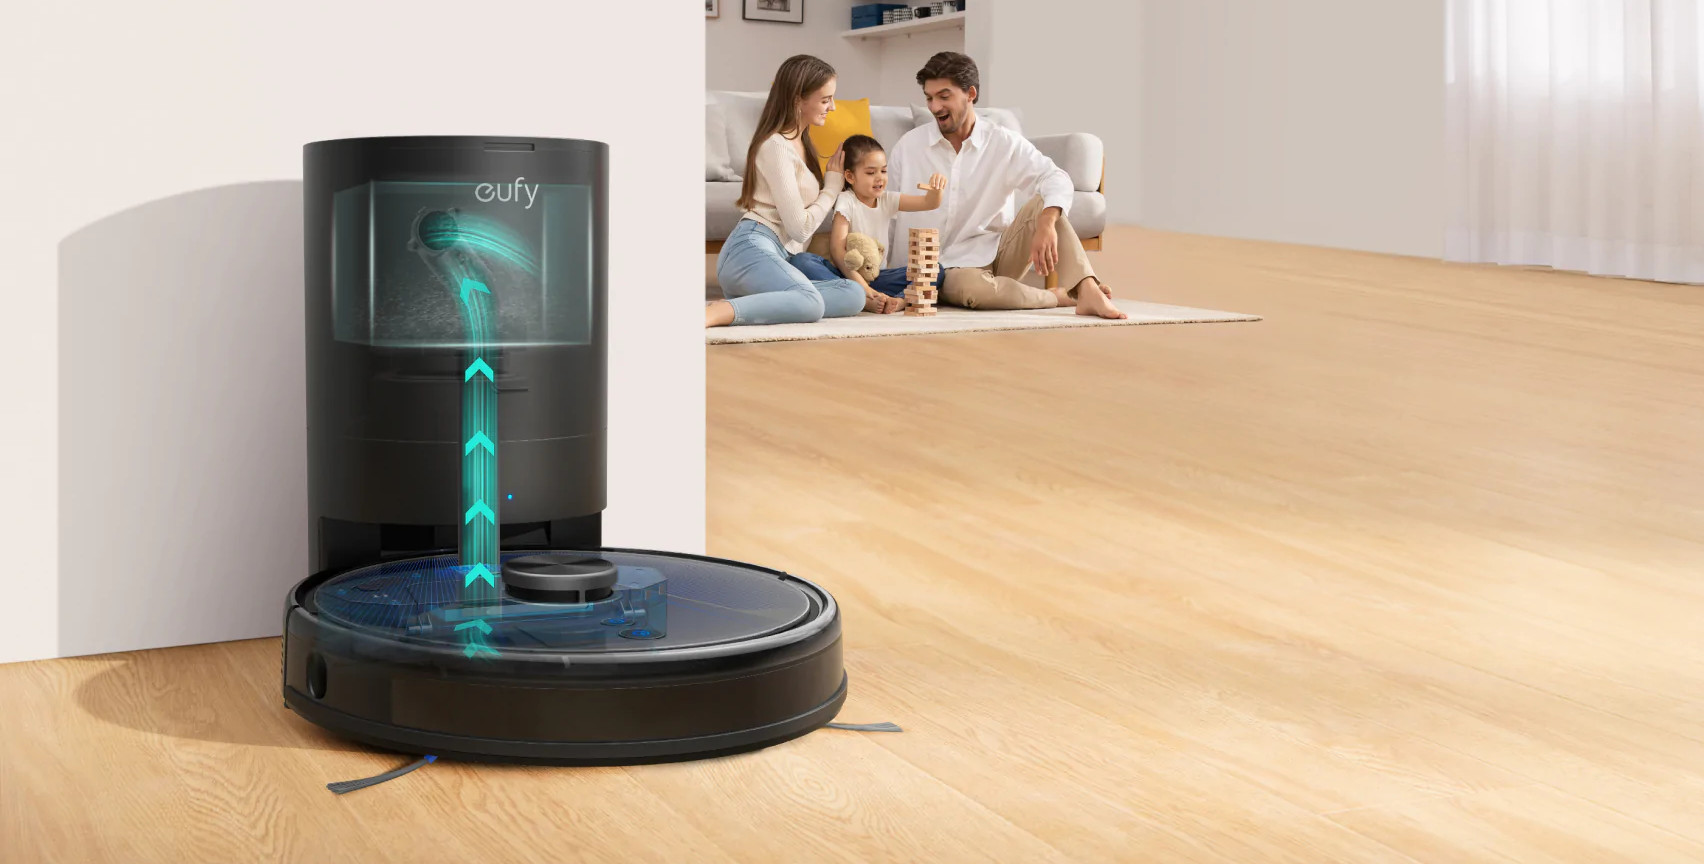 Eufy Just Launched The Eufy Clean RoboVac L35 Hybrid, Eufy's First 